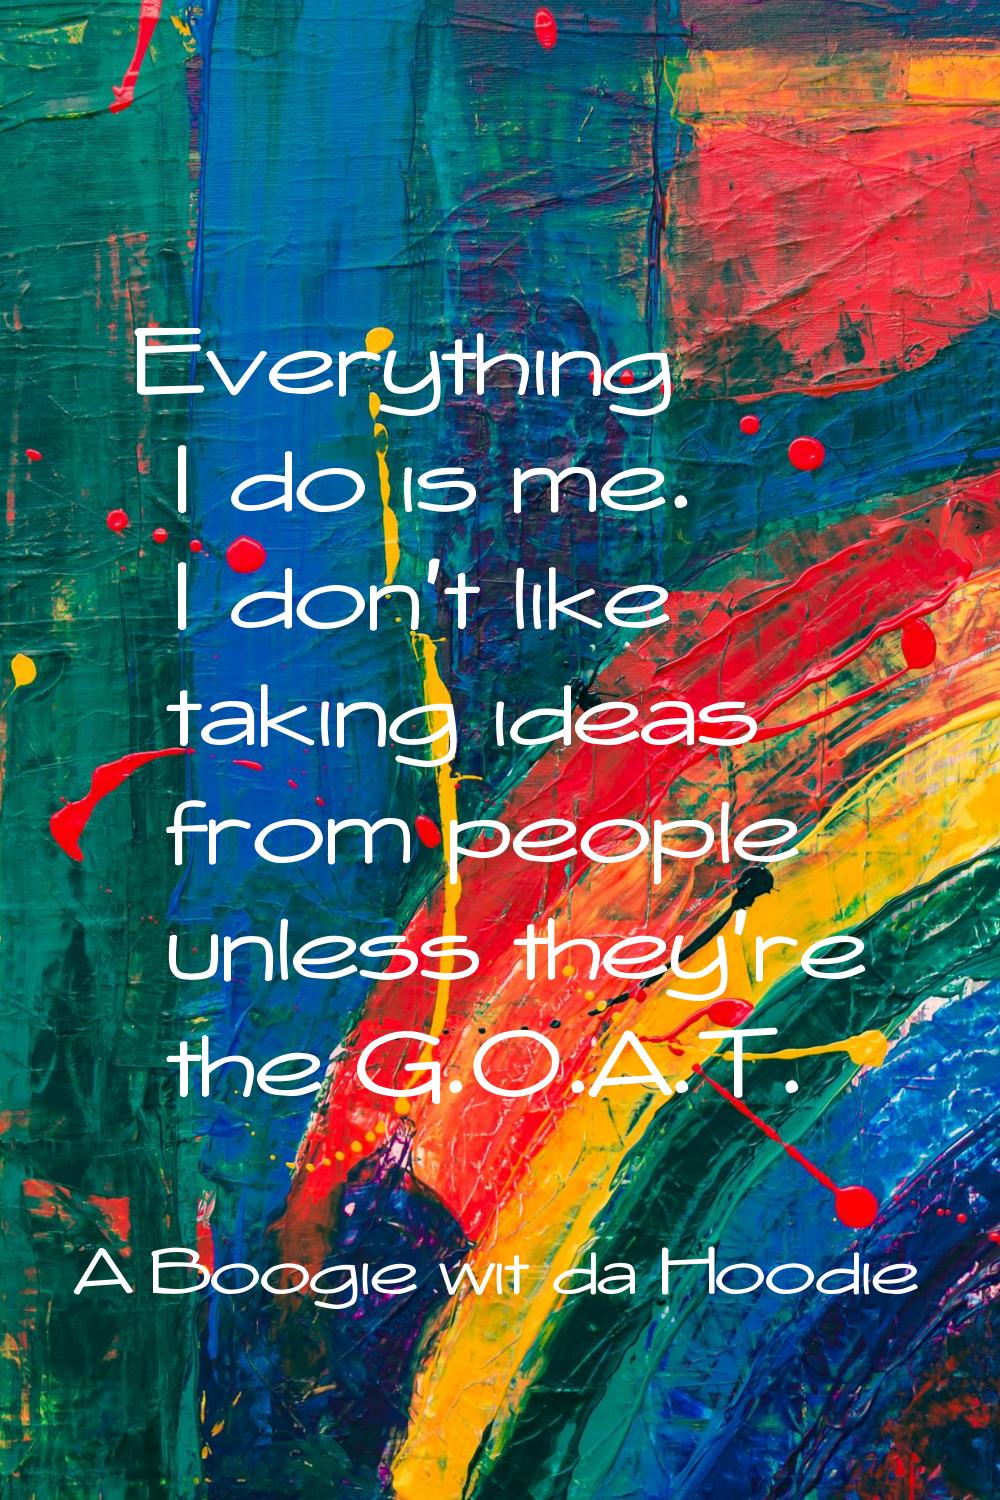 Everything I do is me. I don't like taking ideas from people unless they're the G.O.A.T.